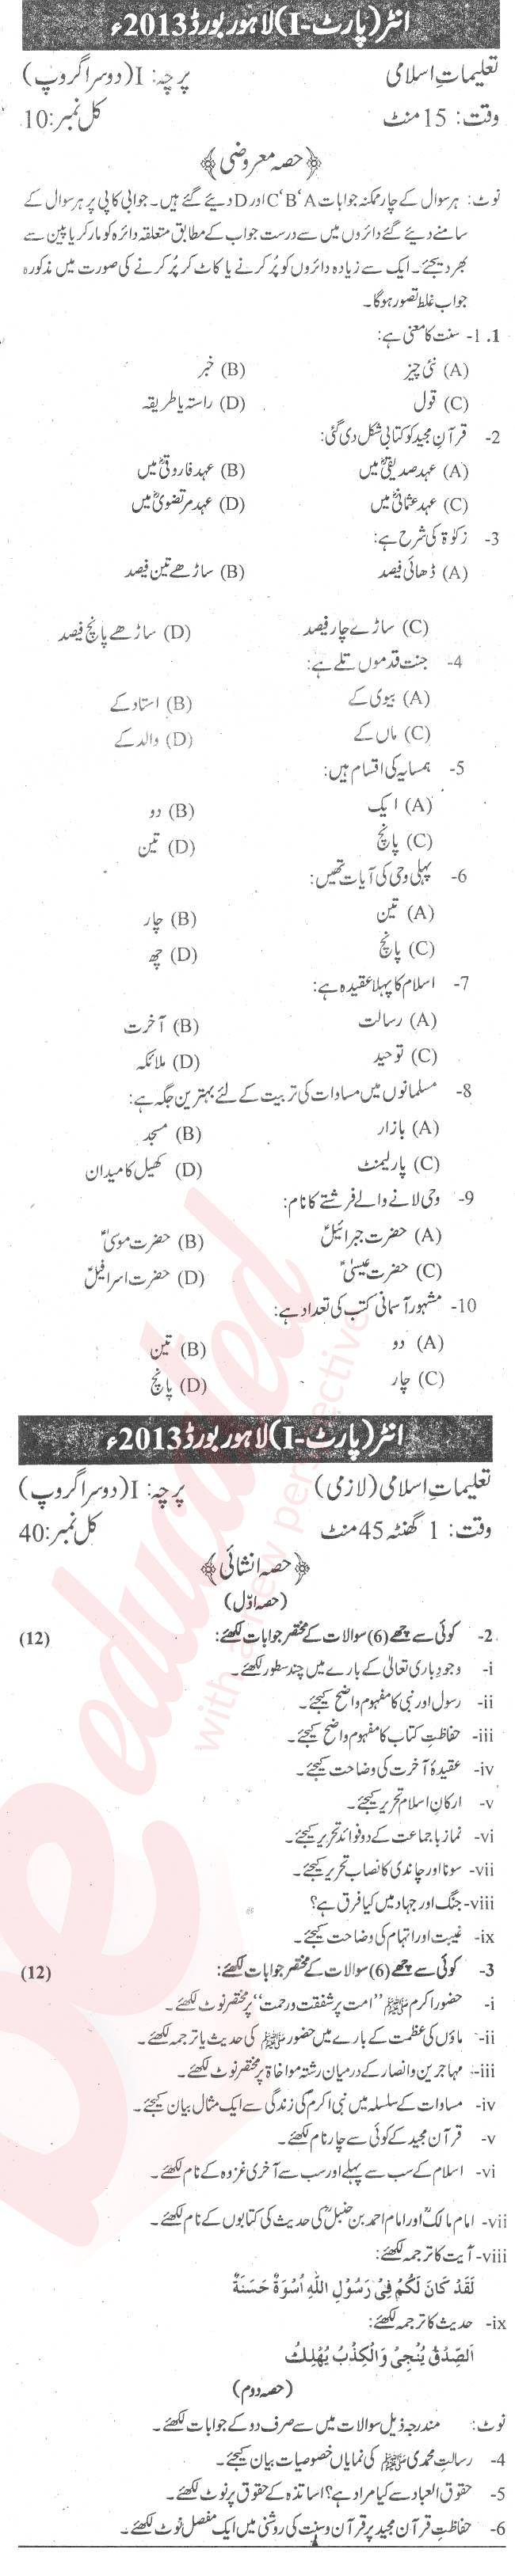 Islamic Studies 11th class Past Paper Group 2 BISE Lahore 2013